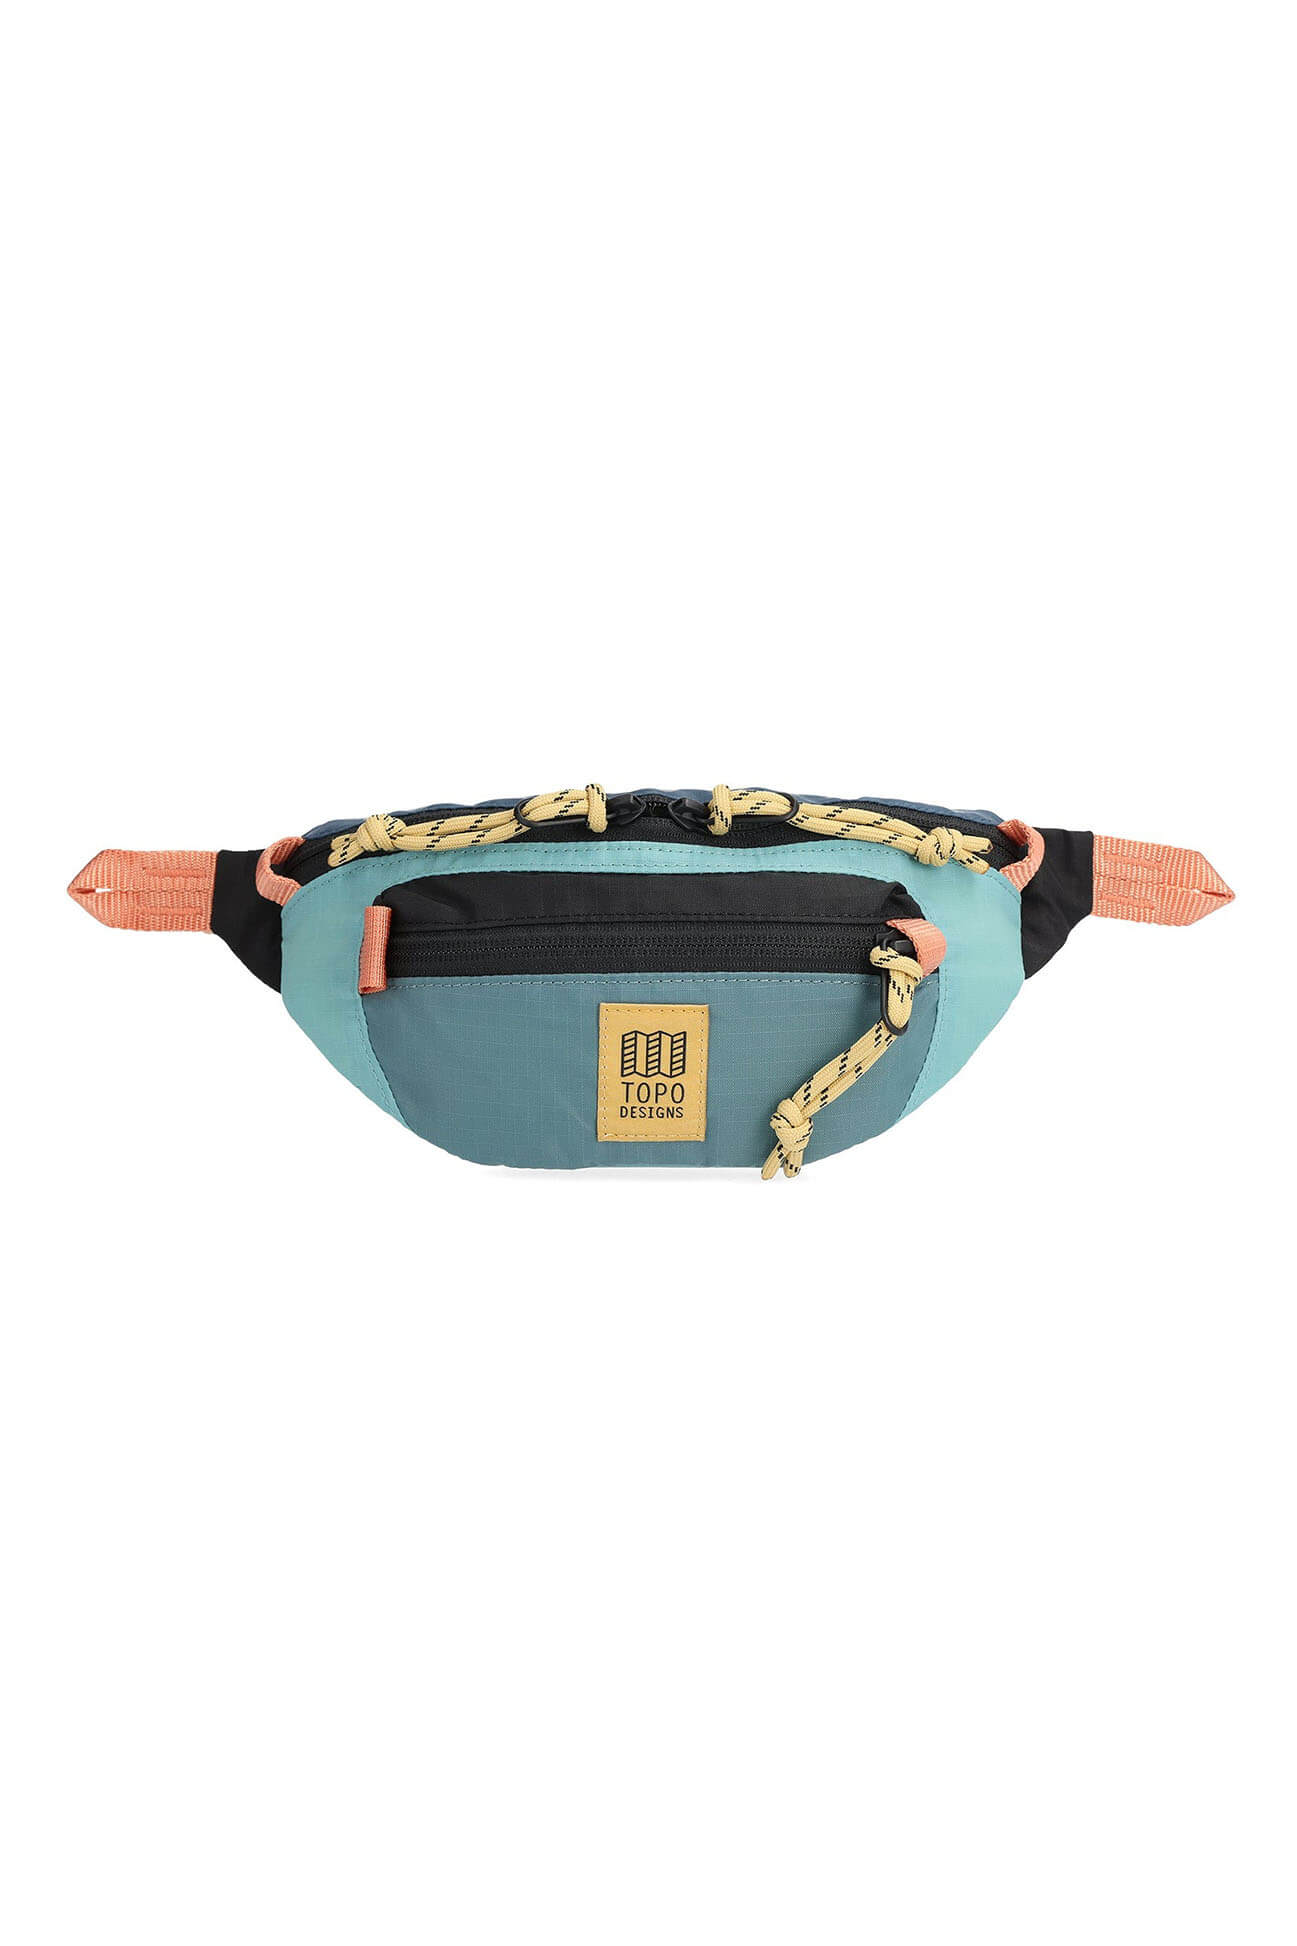 Topo Designs mountain waist pack in geode green and sea pine